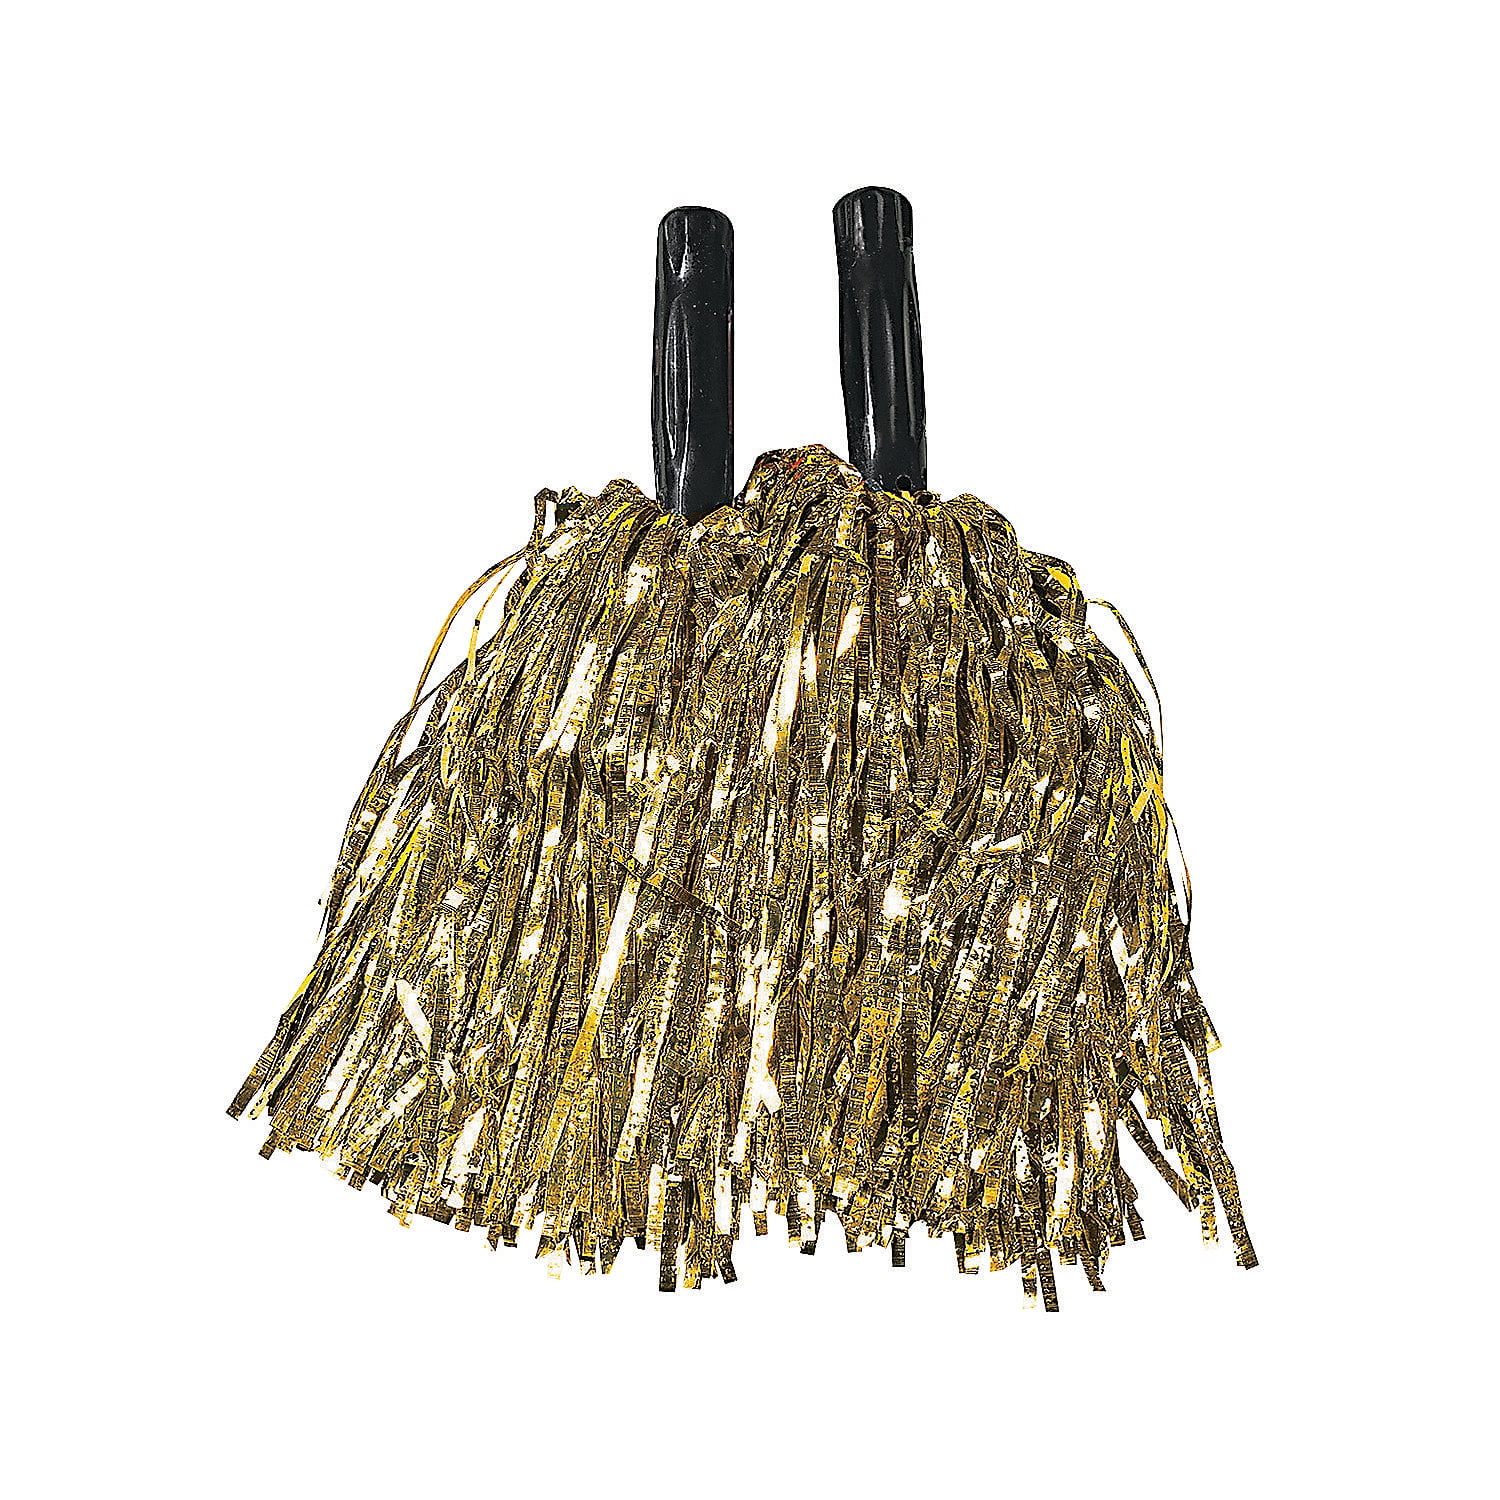 20cm Golden Pom Pom For Cheer Leading, For Cheering at Rs 65/piece in Delhi